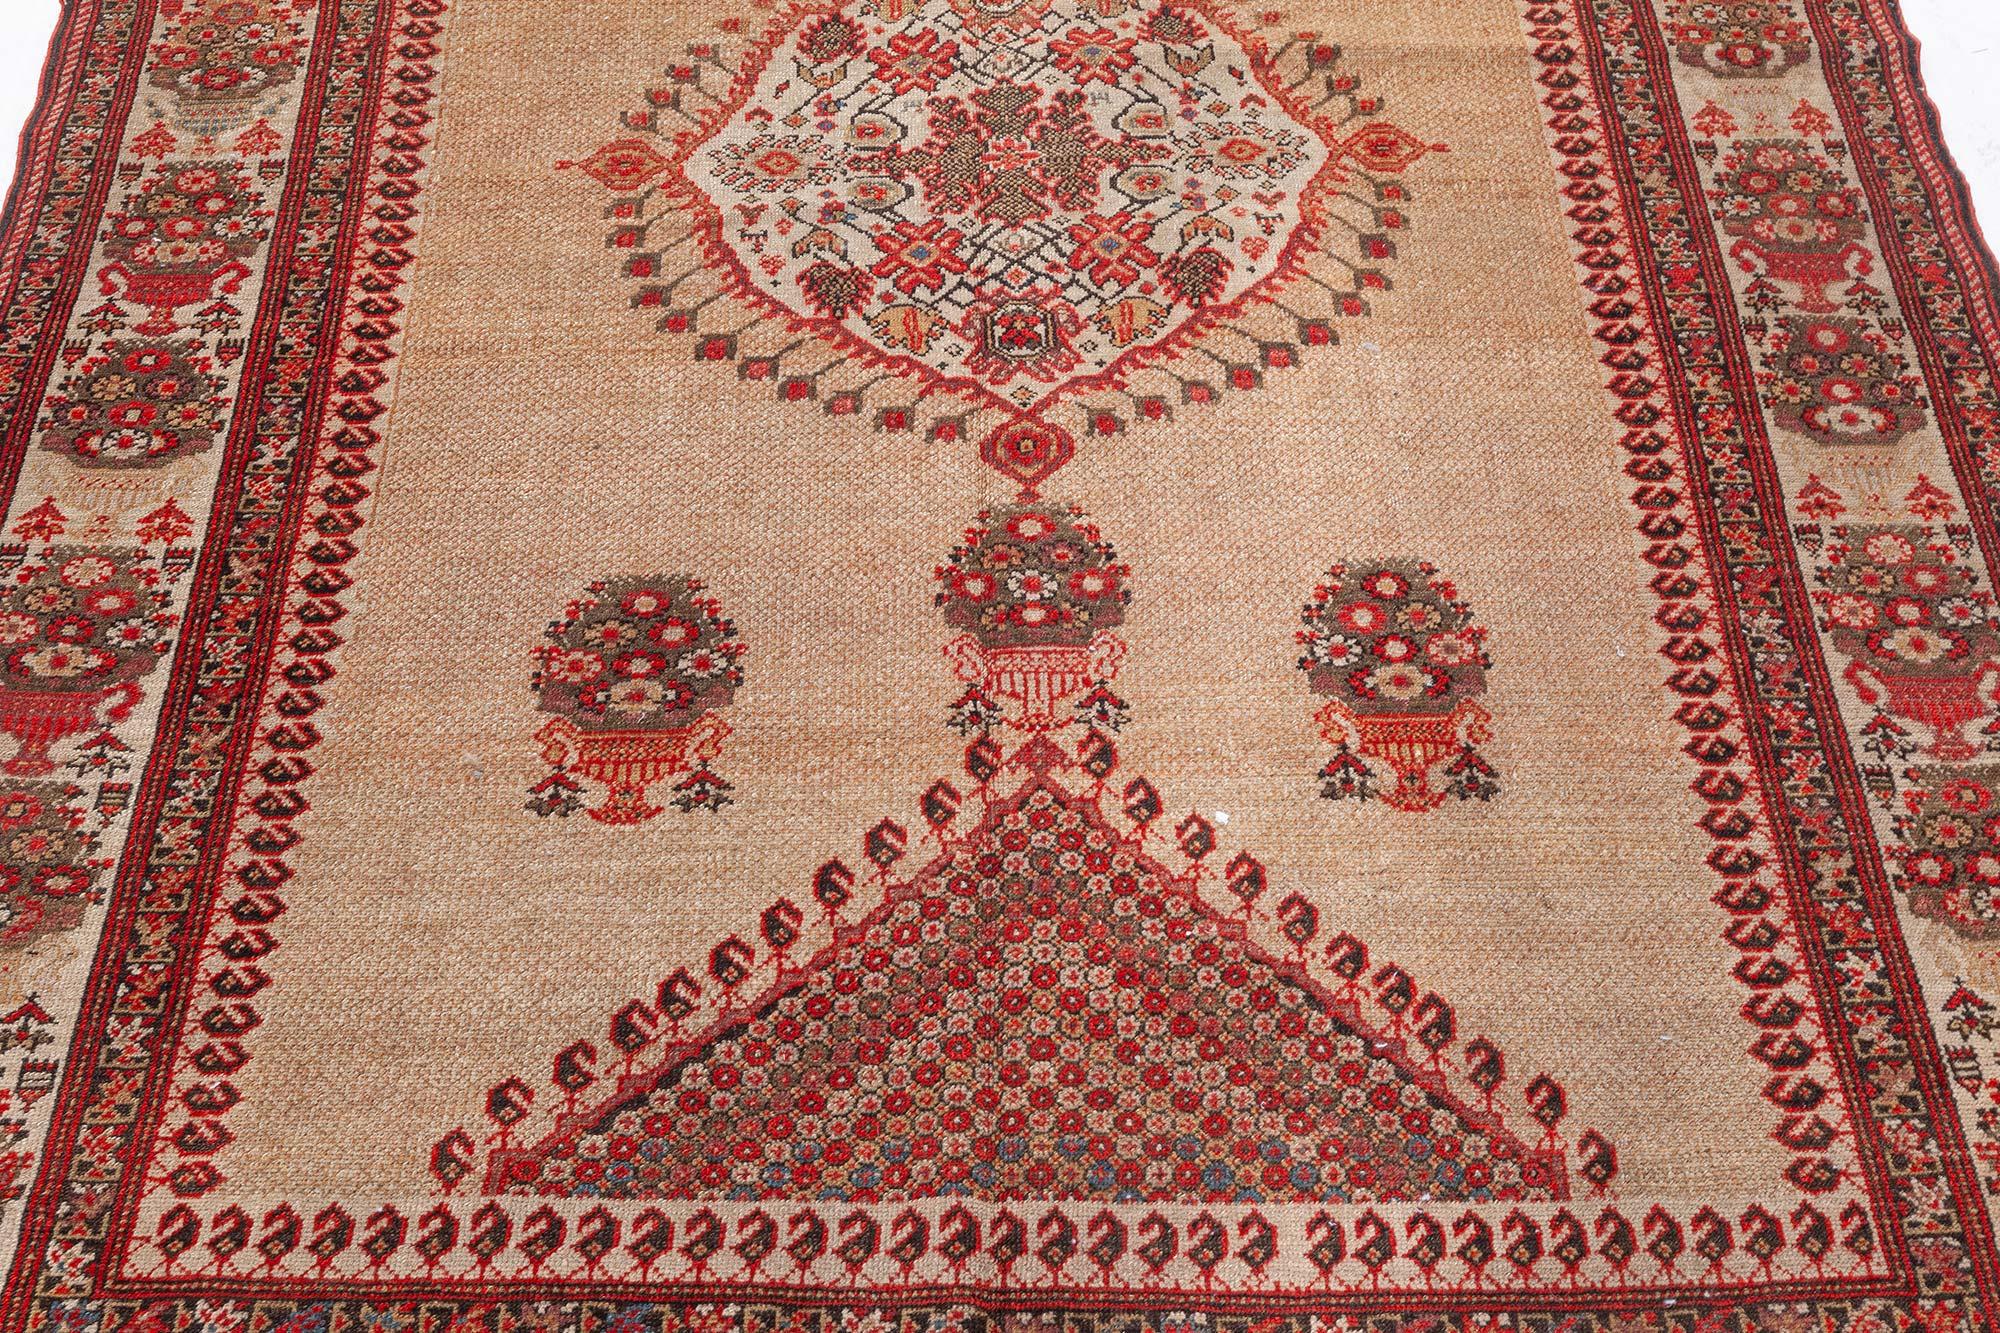 Authentic 19th Century Sarouk Handmade Wool Rug In Good Condition For Sale In New York, NY